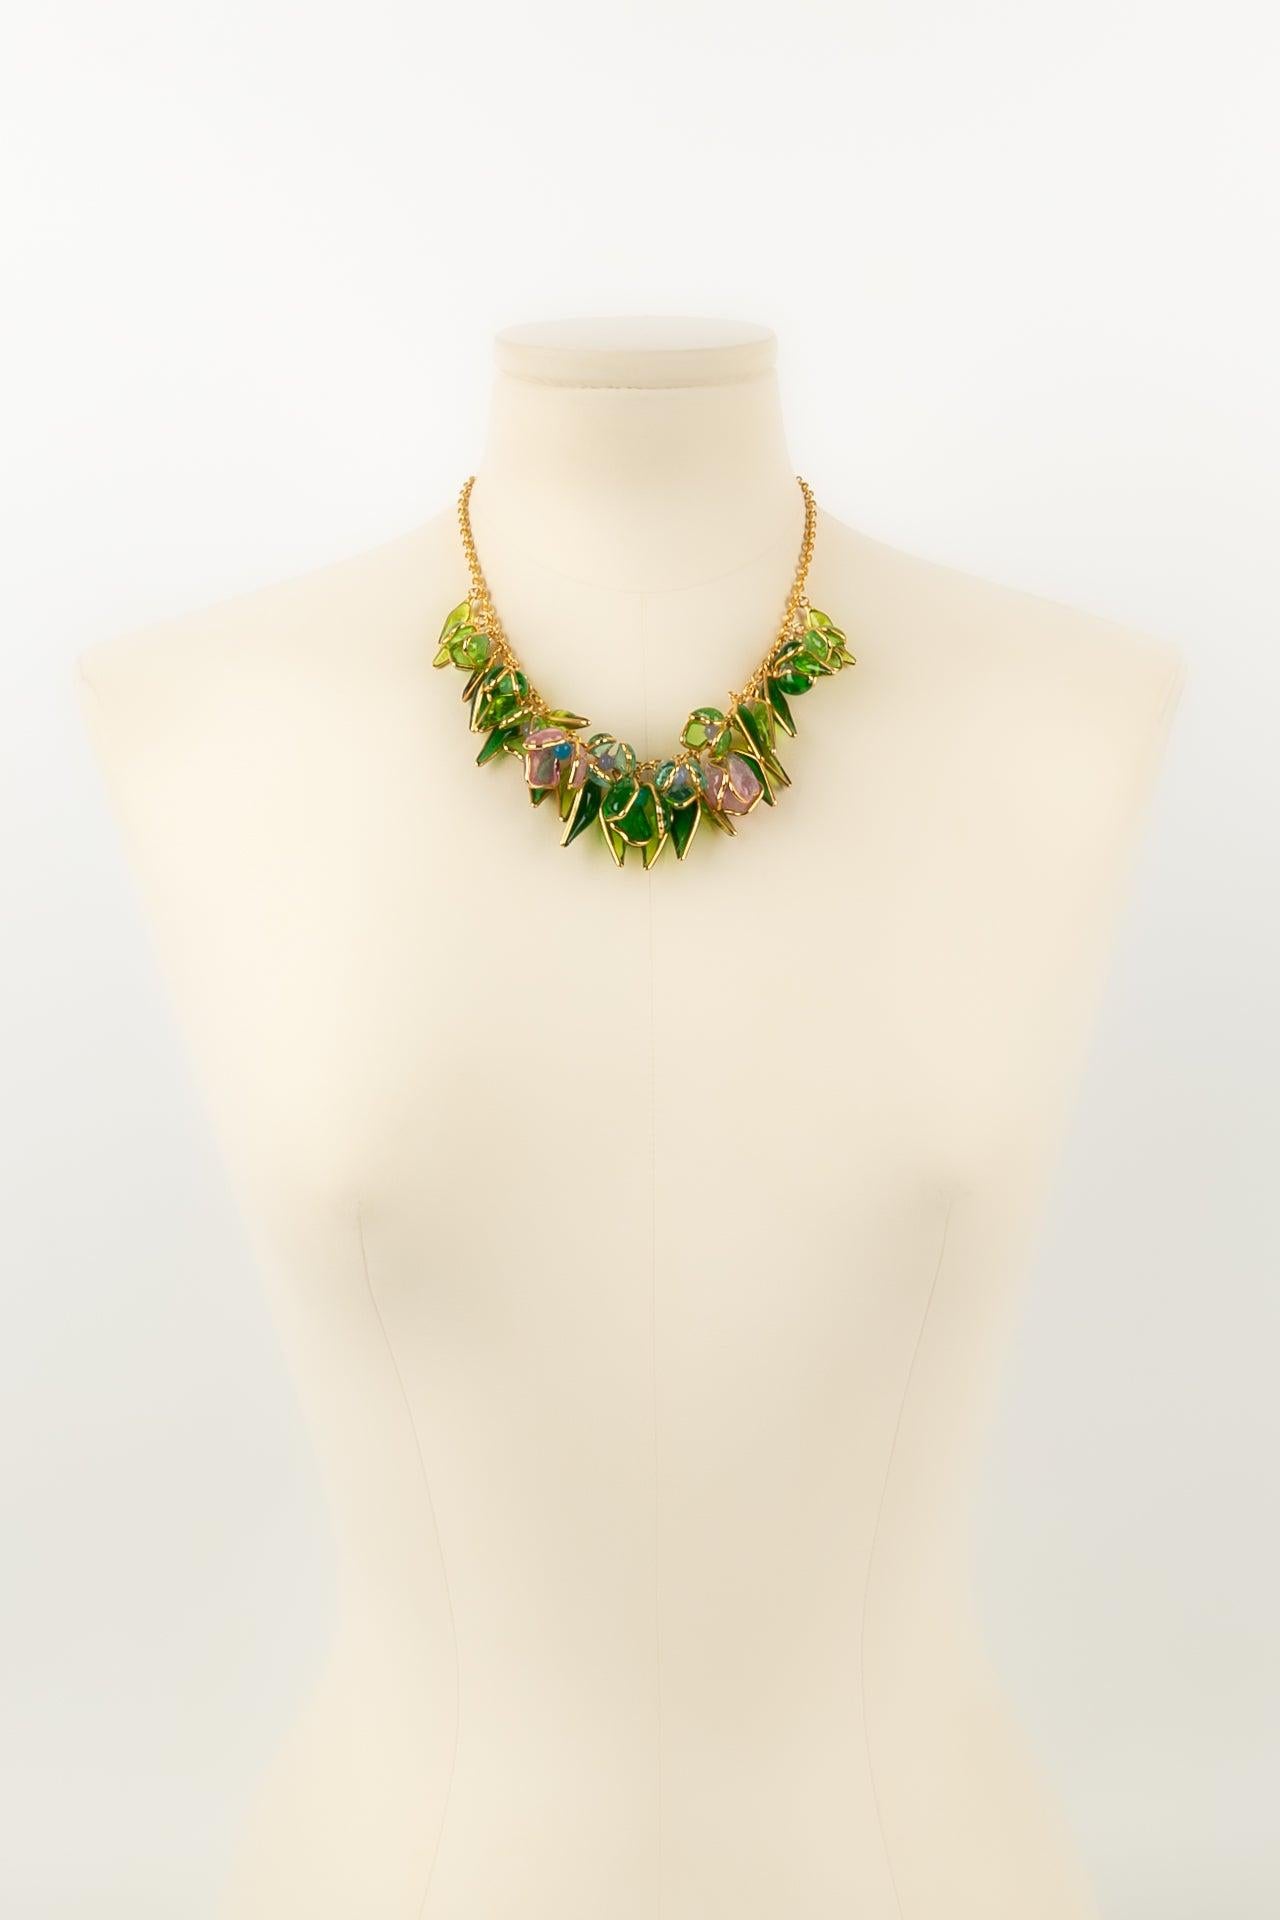 Augustine - (Made in France) Flexible necklace in gold-plated metal and glass paste.

Additional information:
Condition: Very good condition
Dimensions: Length: 40 cm to 46 cm

Seller Reference: BC180